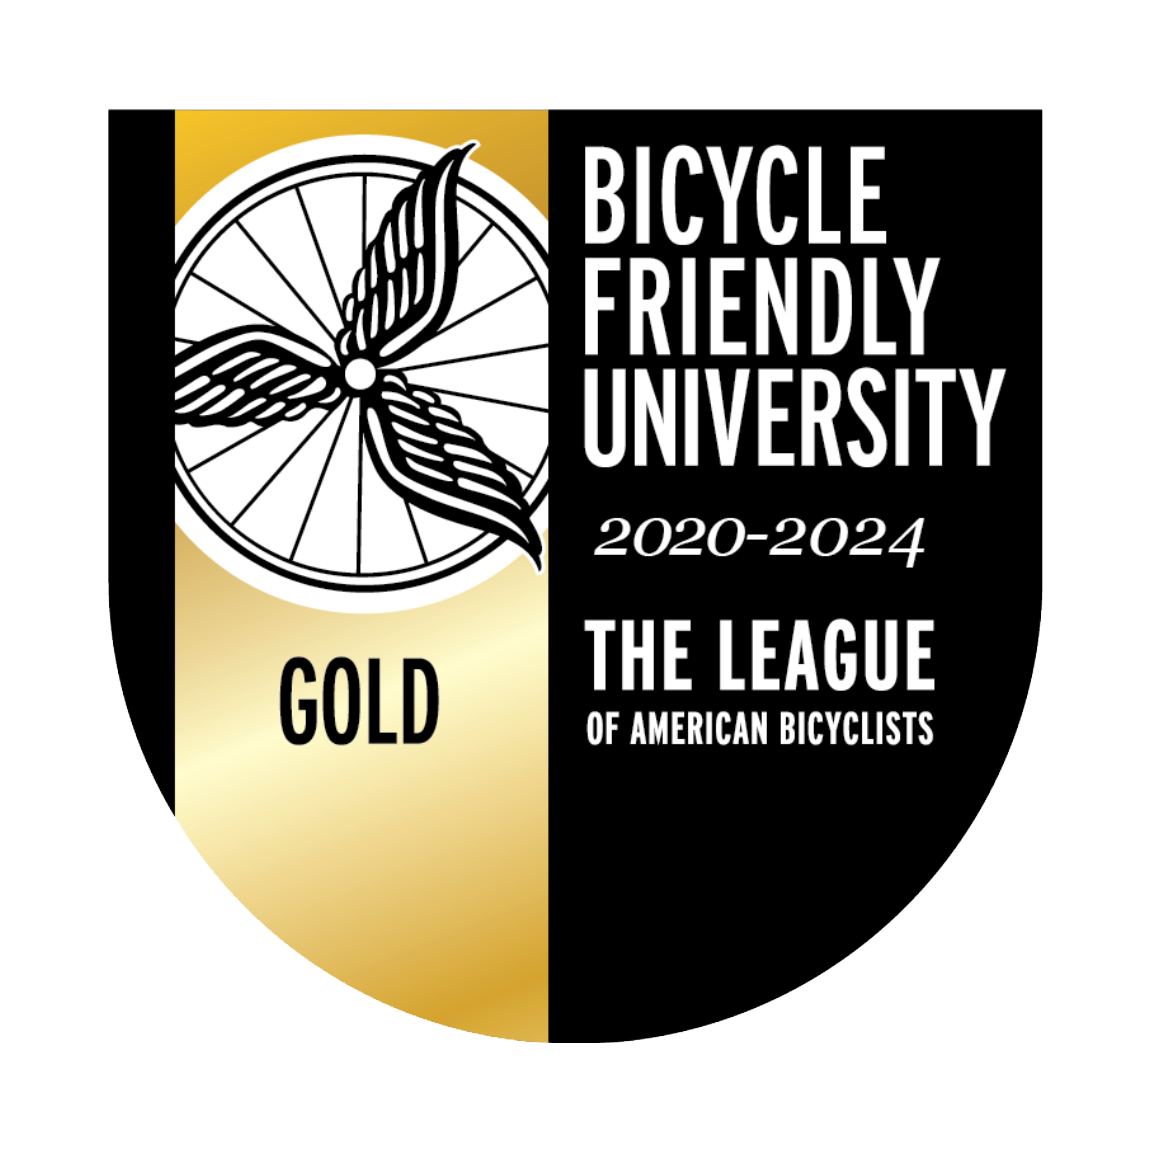 gold badge from The League of American Bicyclists for being a Bicycle Friendly University 2020-2024